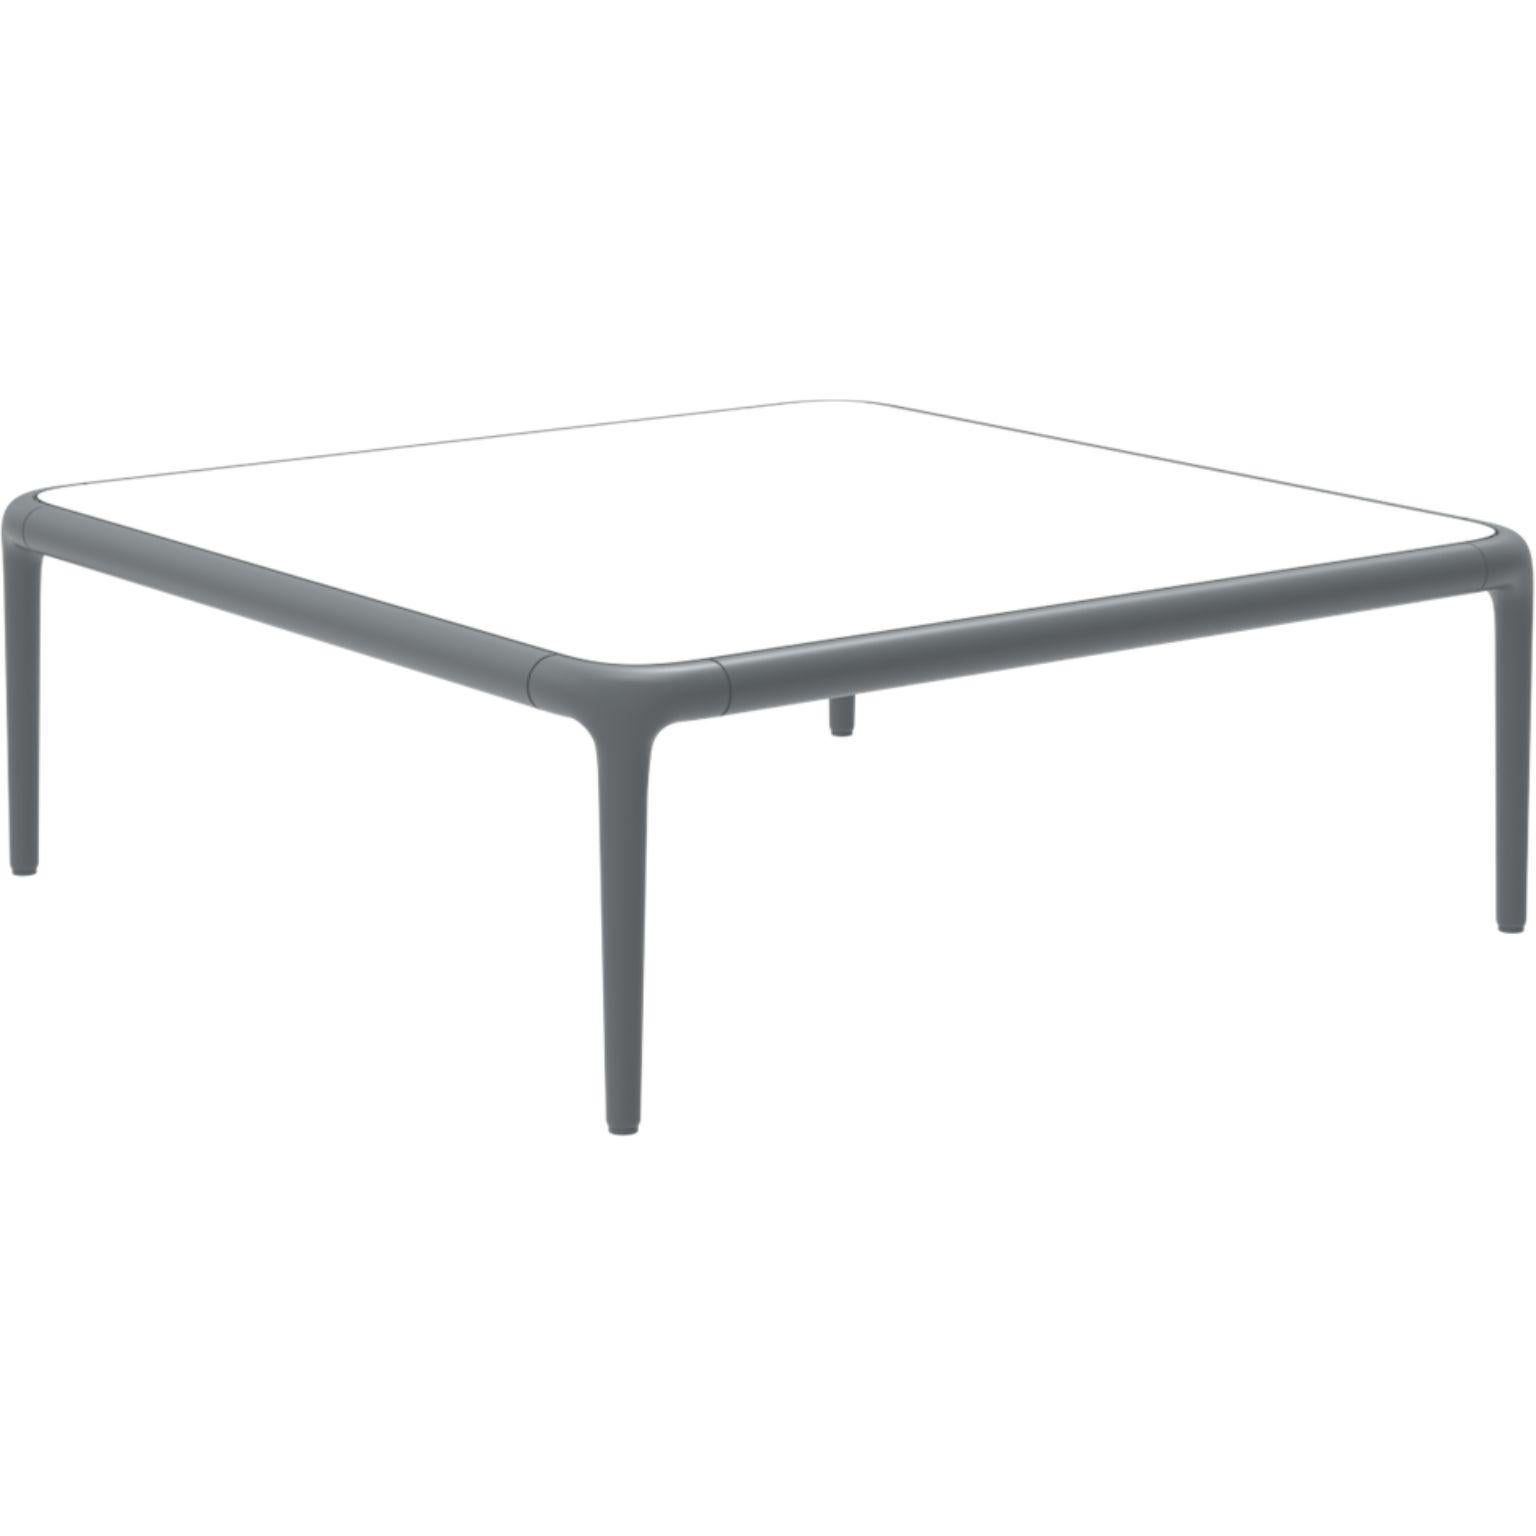 Xaloc grey coffee table 80 with glass top by Mowee.
Dimensions: D80 x W80 x H28 cm
Materials: Aluminum, tinted tempered glass top.
Also available in different aluminum colors and finishes (HPL Black Edge or Neolith). 

Xaloc synthesizes the